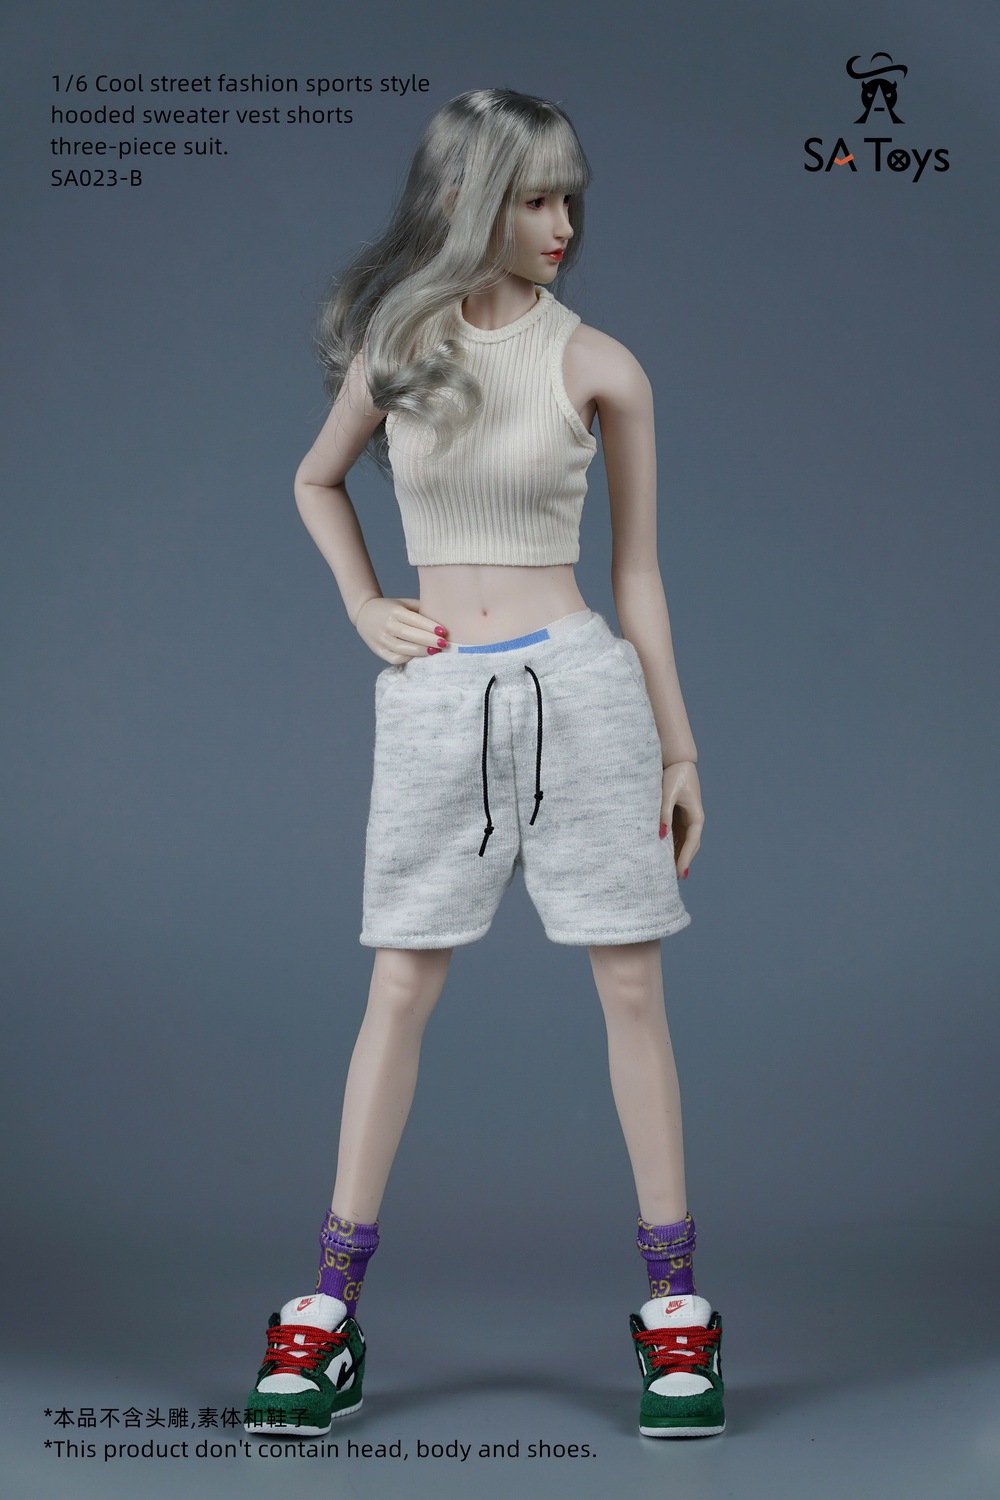 hipskirt - NEW PRODUCT: SA Toys: 1/6 hip skirt / floral elastic skirt / fashionable sports style hooded sweater cover, hip-hop fisherman hat halter and footwear casual pants [variety optional] 17020111